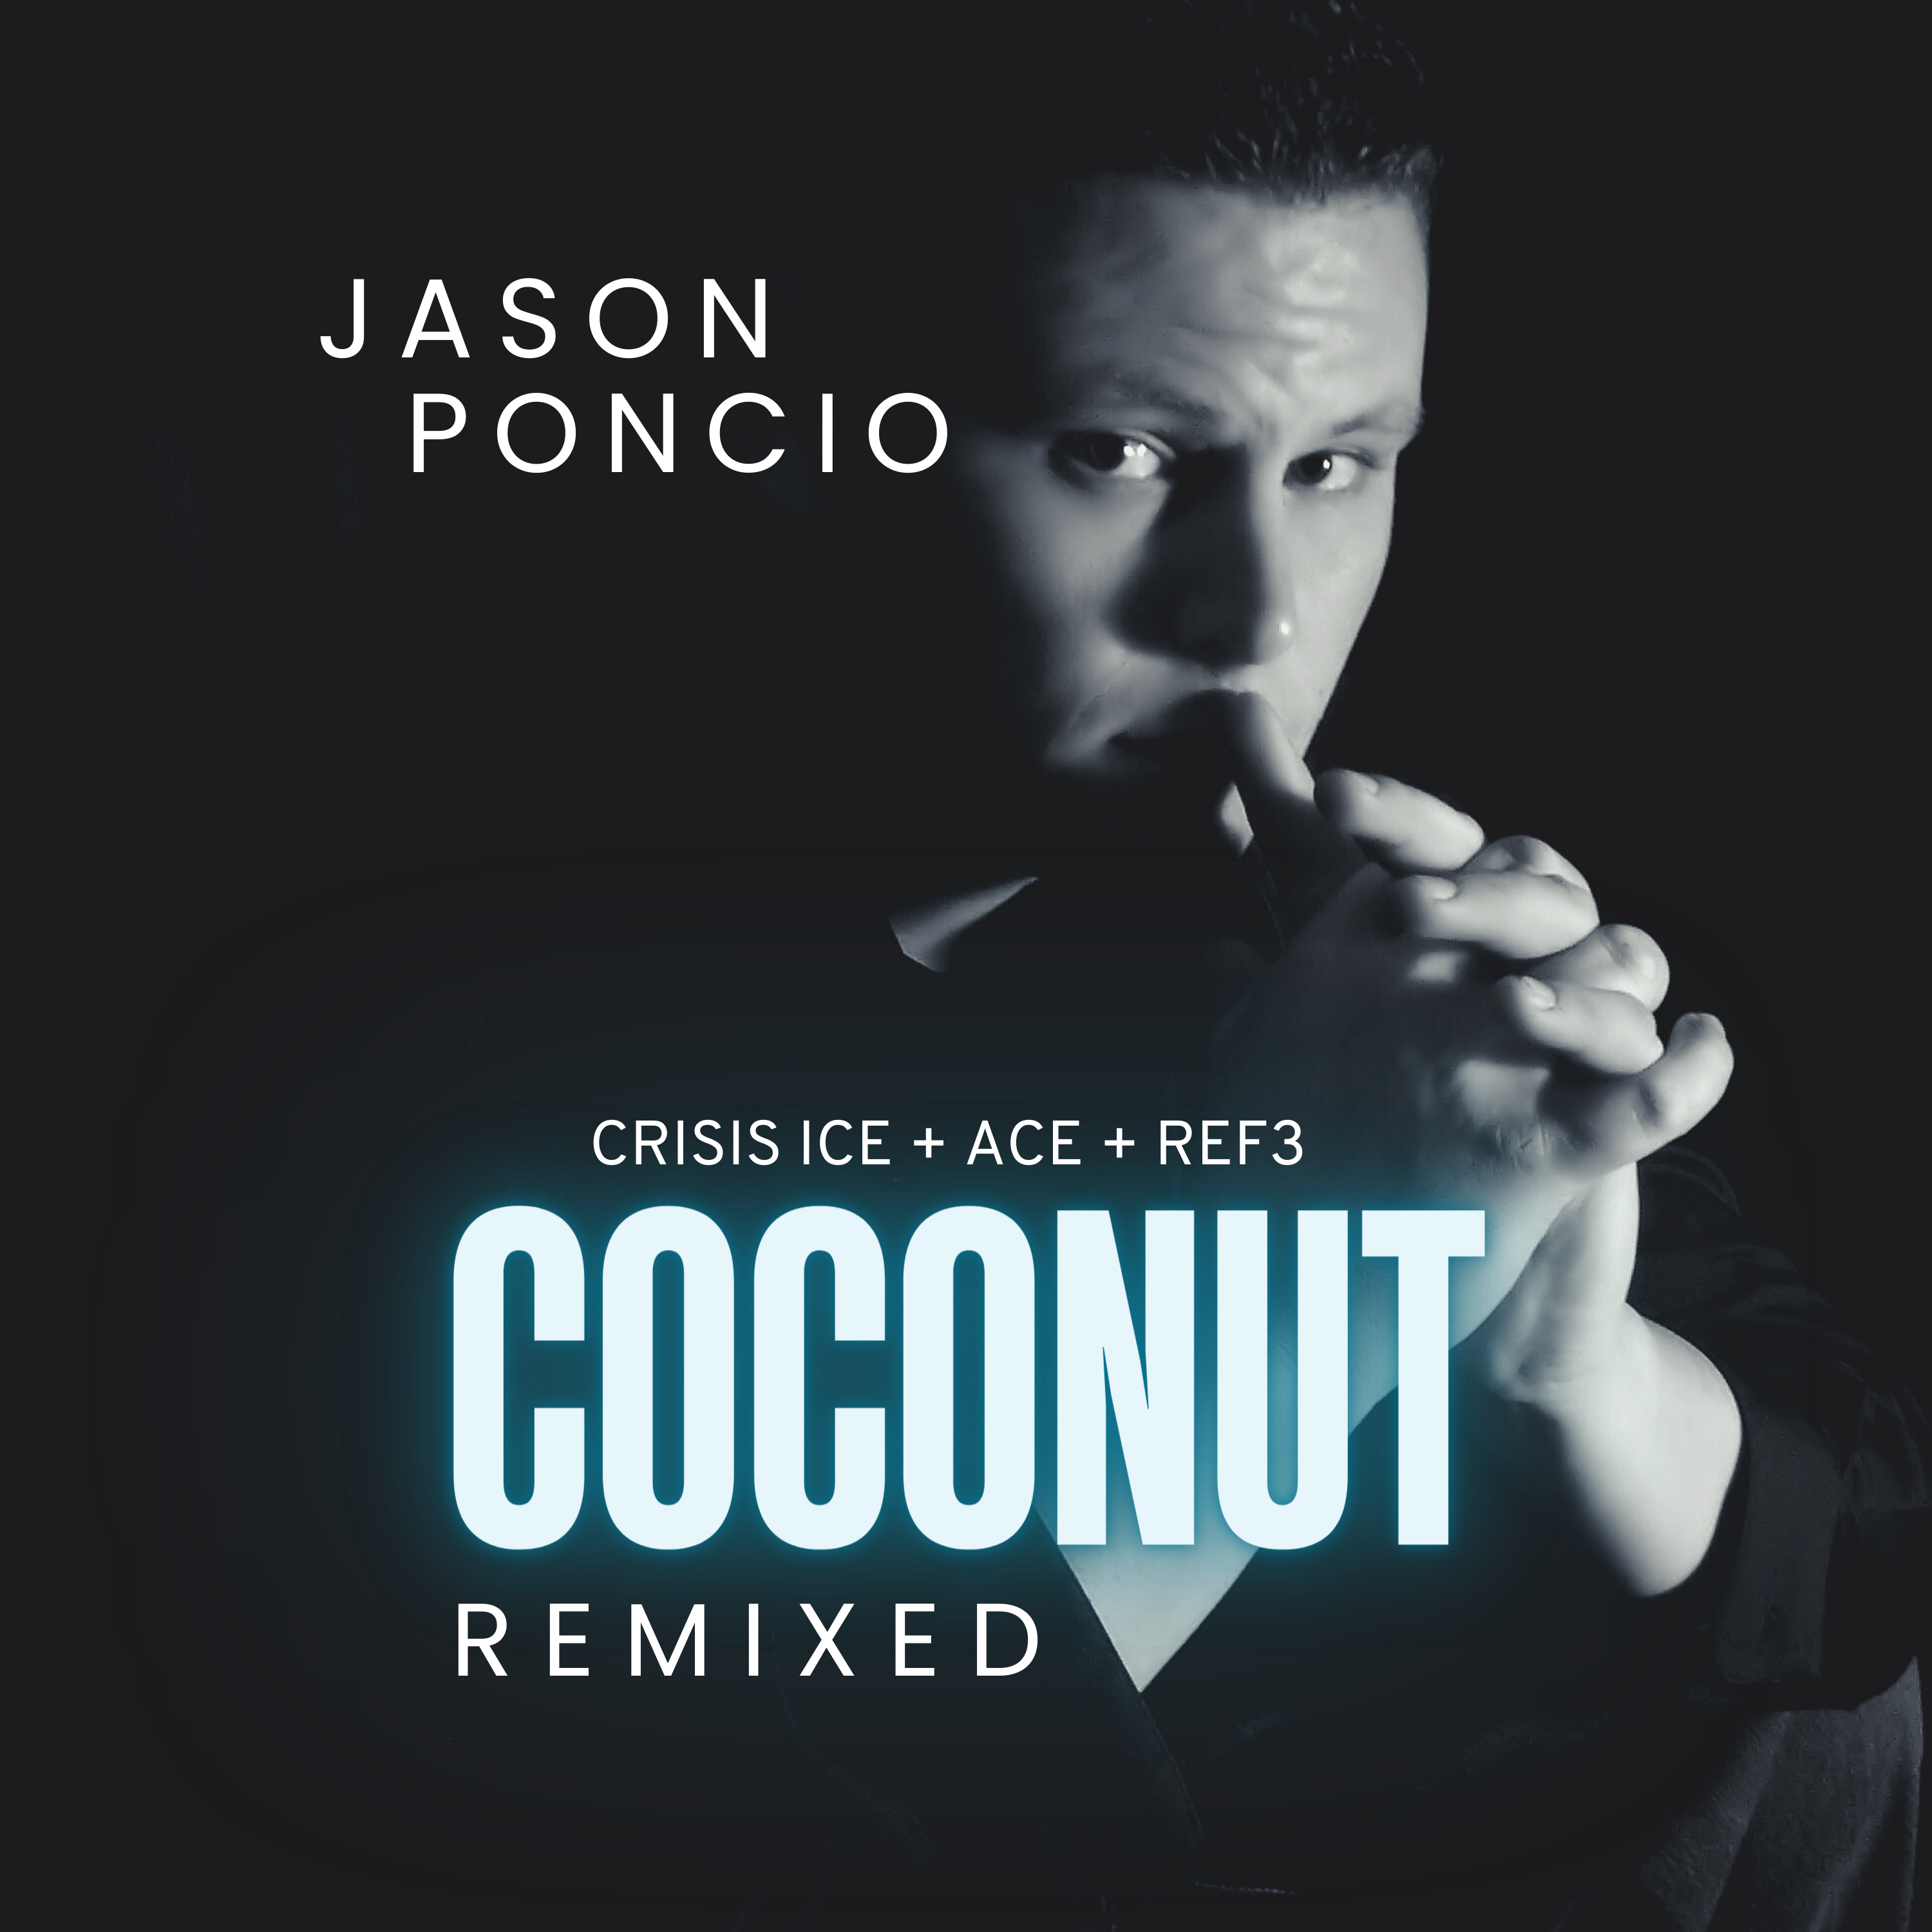 Jason Poncio’s Highly Anticipated New Remixed Version of Hit Single "Coconut" Now Available Worldwide 